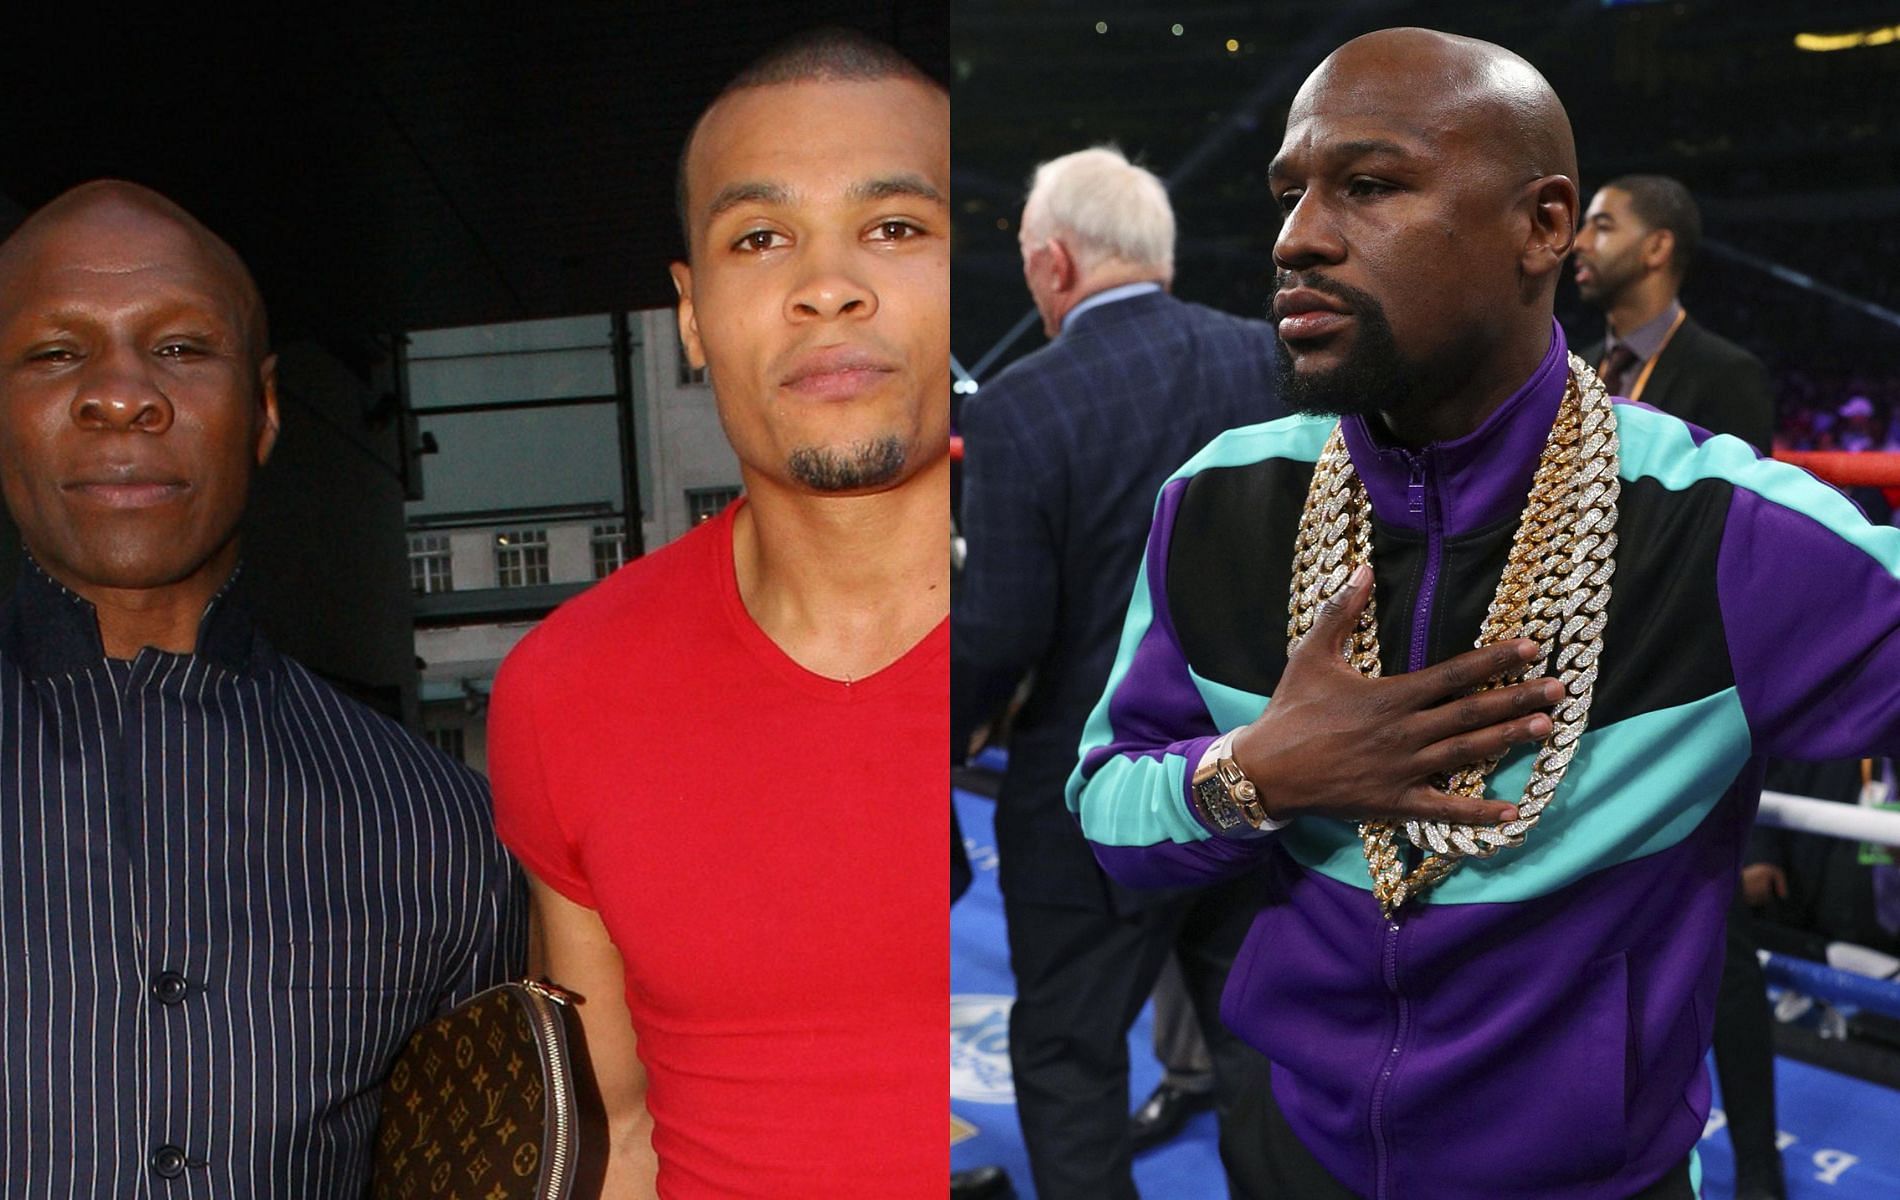 Chris Eubank Sr. with his son (left) and Floyd Mayweather (right)